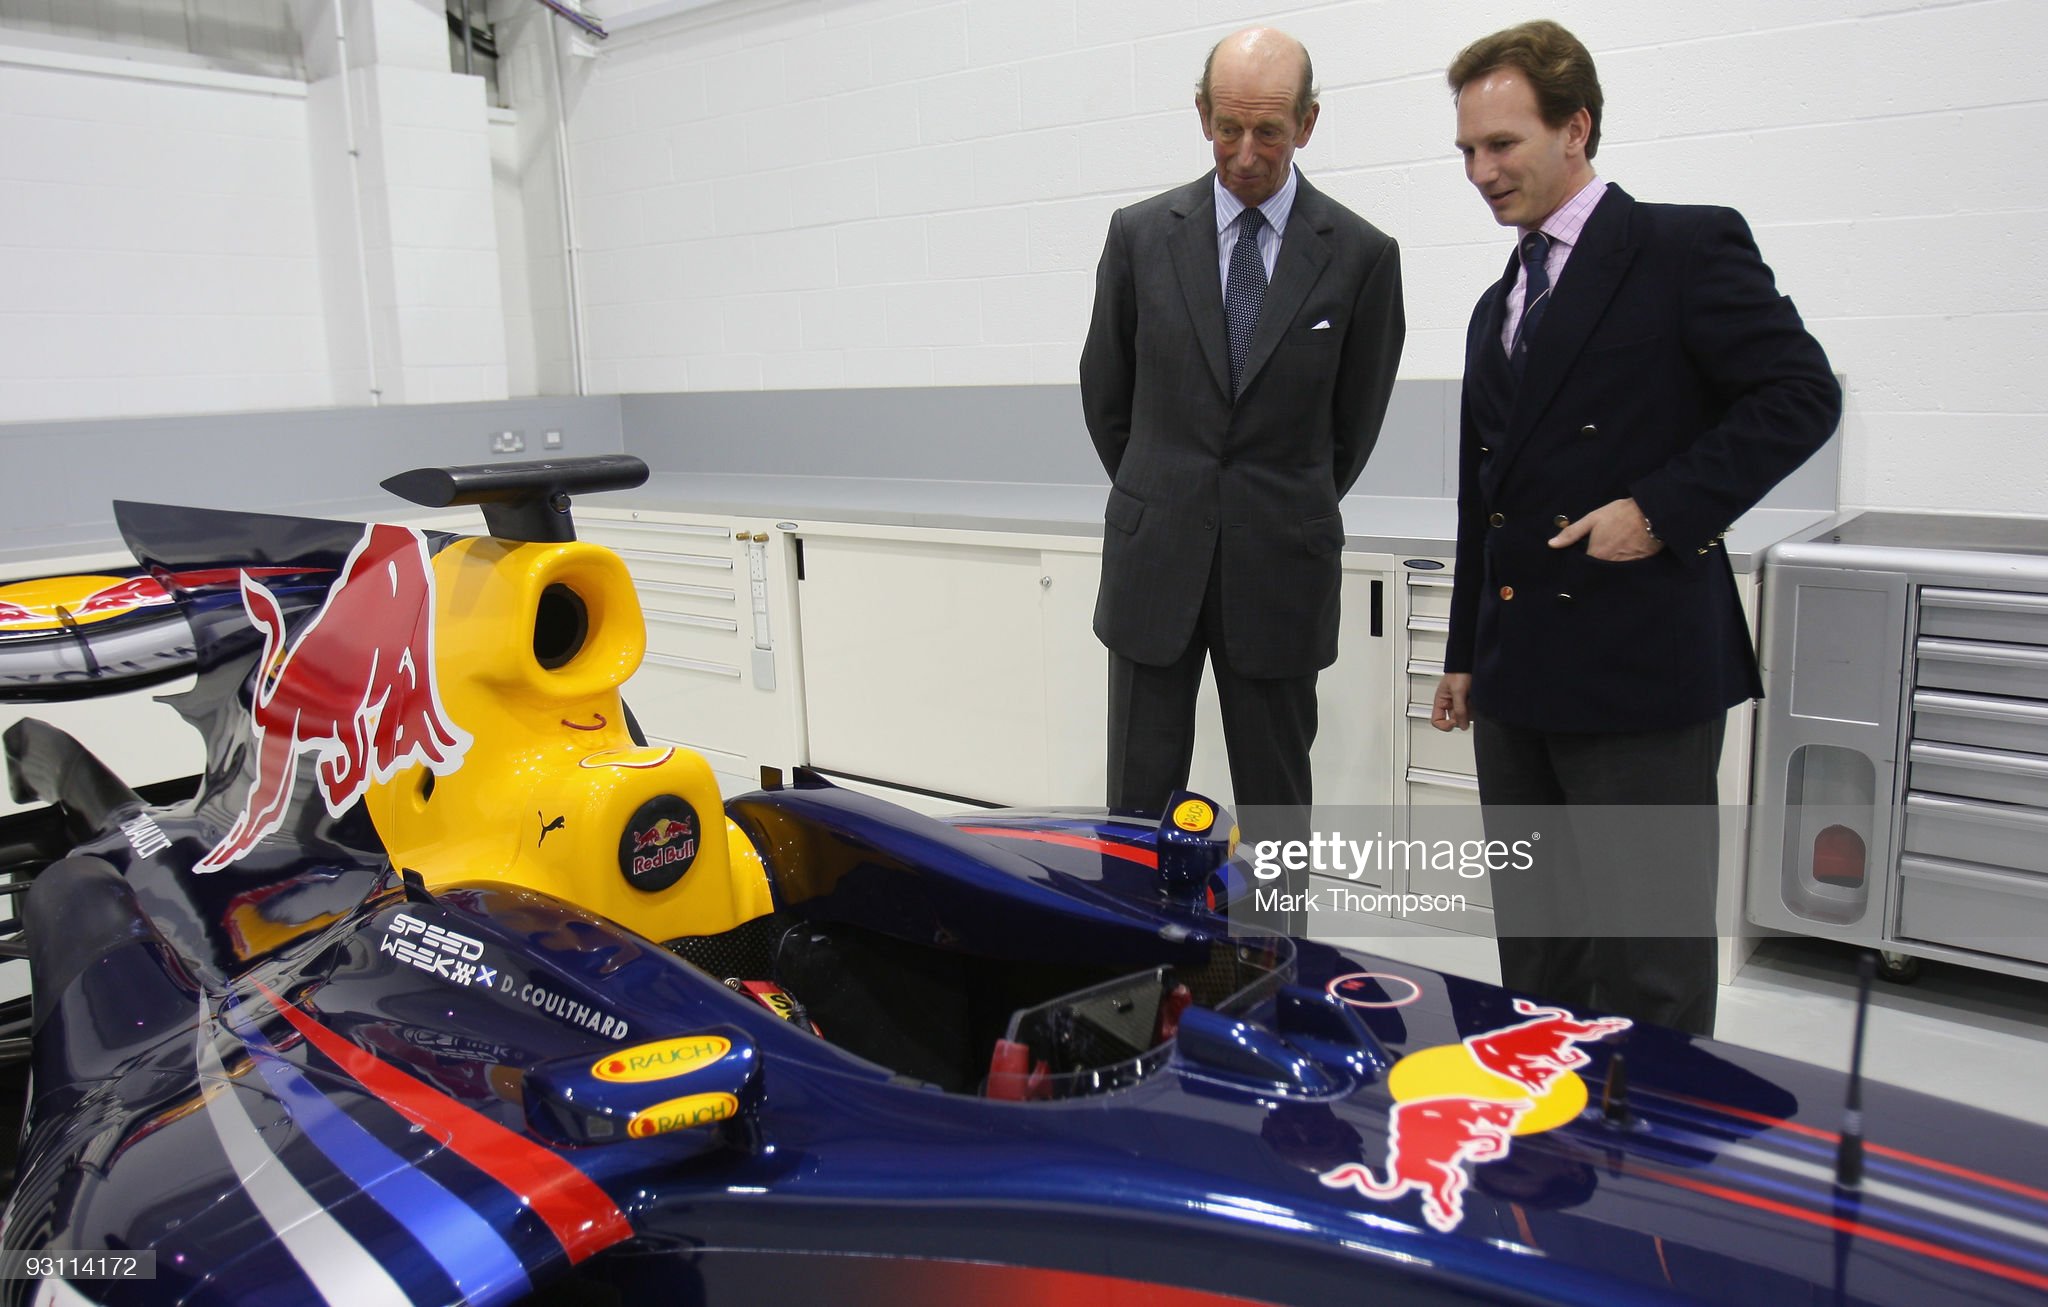 Prince Edward, Duke of Kent, with Red Bull Racing principal Christian Horner at the Red Bull Racing headquarters in Milton Keynes, England, on November 17, 2009.